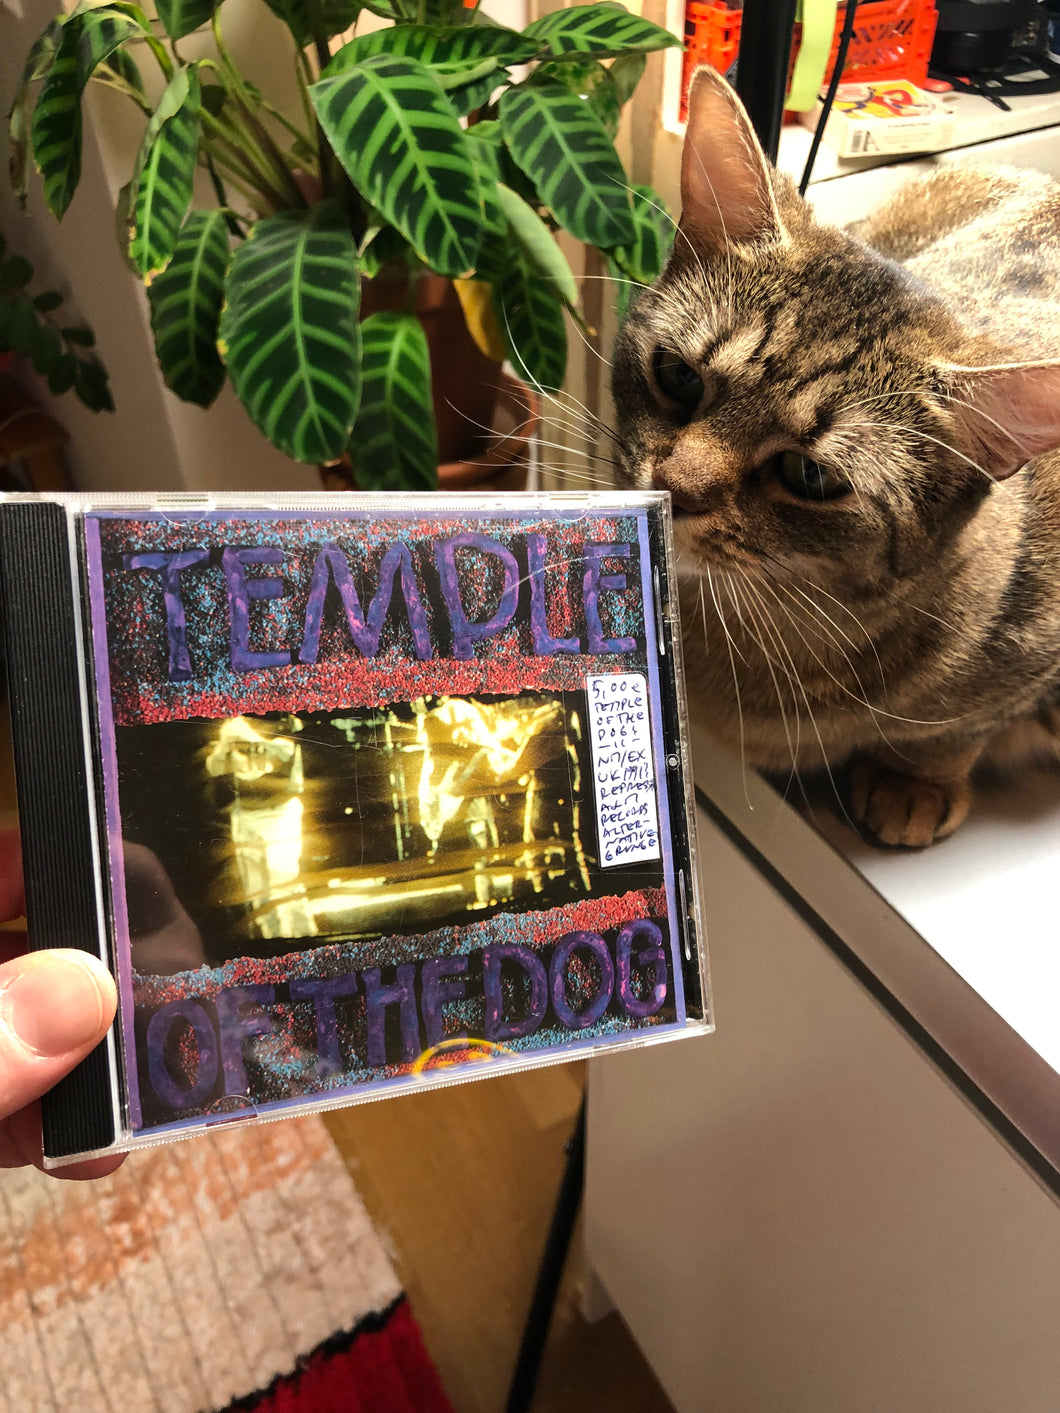 Temple Of The Dog, reissue, UK 1991